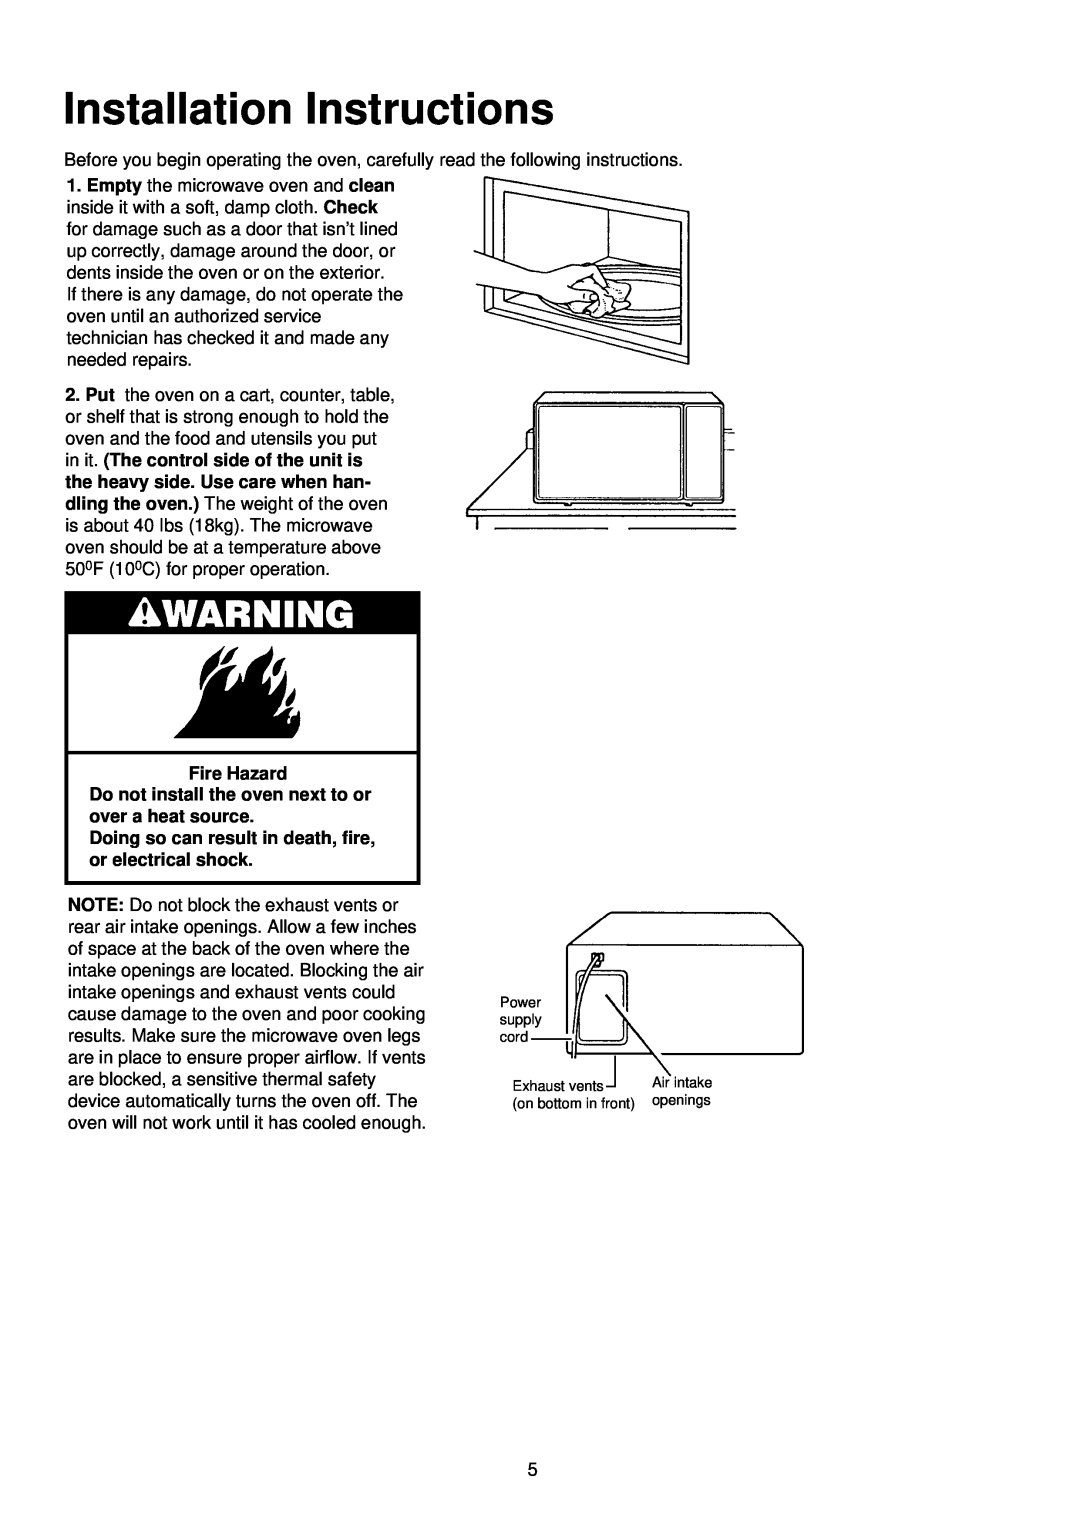 Palsonic PMO-888 Installation Instructions, Fire Hazard Fire Hazard, Do not install the oven next to or over a heat source 